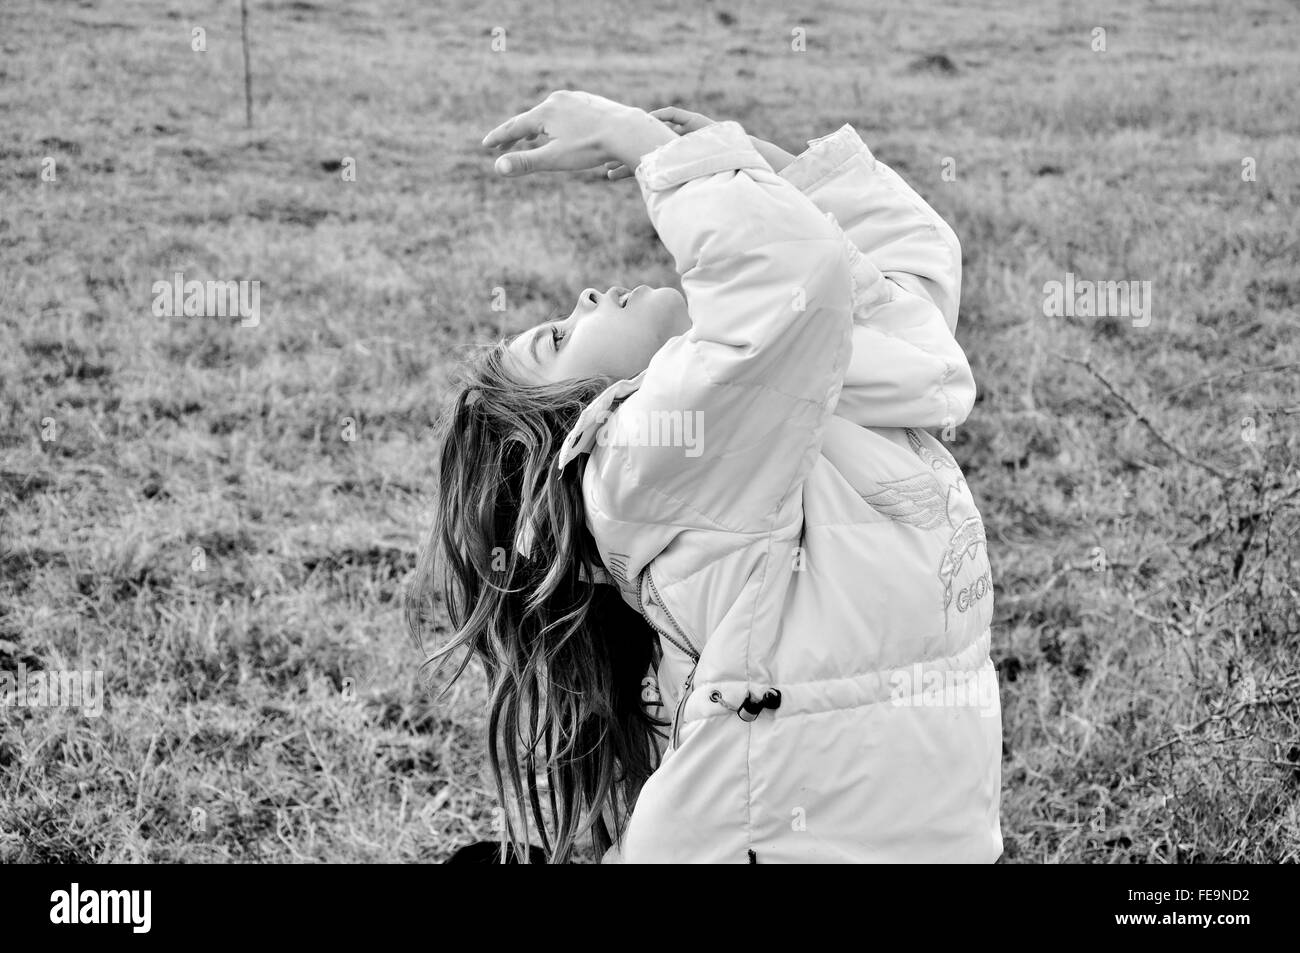 Young girl dancing dancing outdoor in the middle of a cold winter, Stock Photo